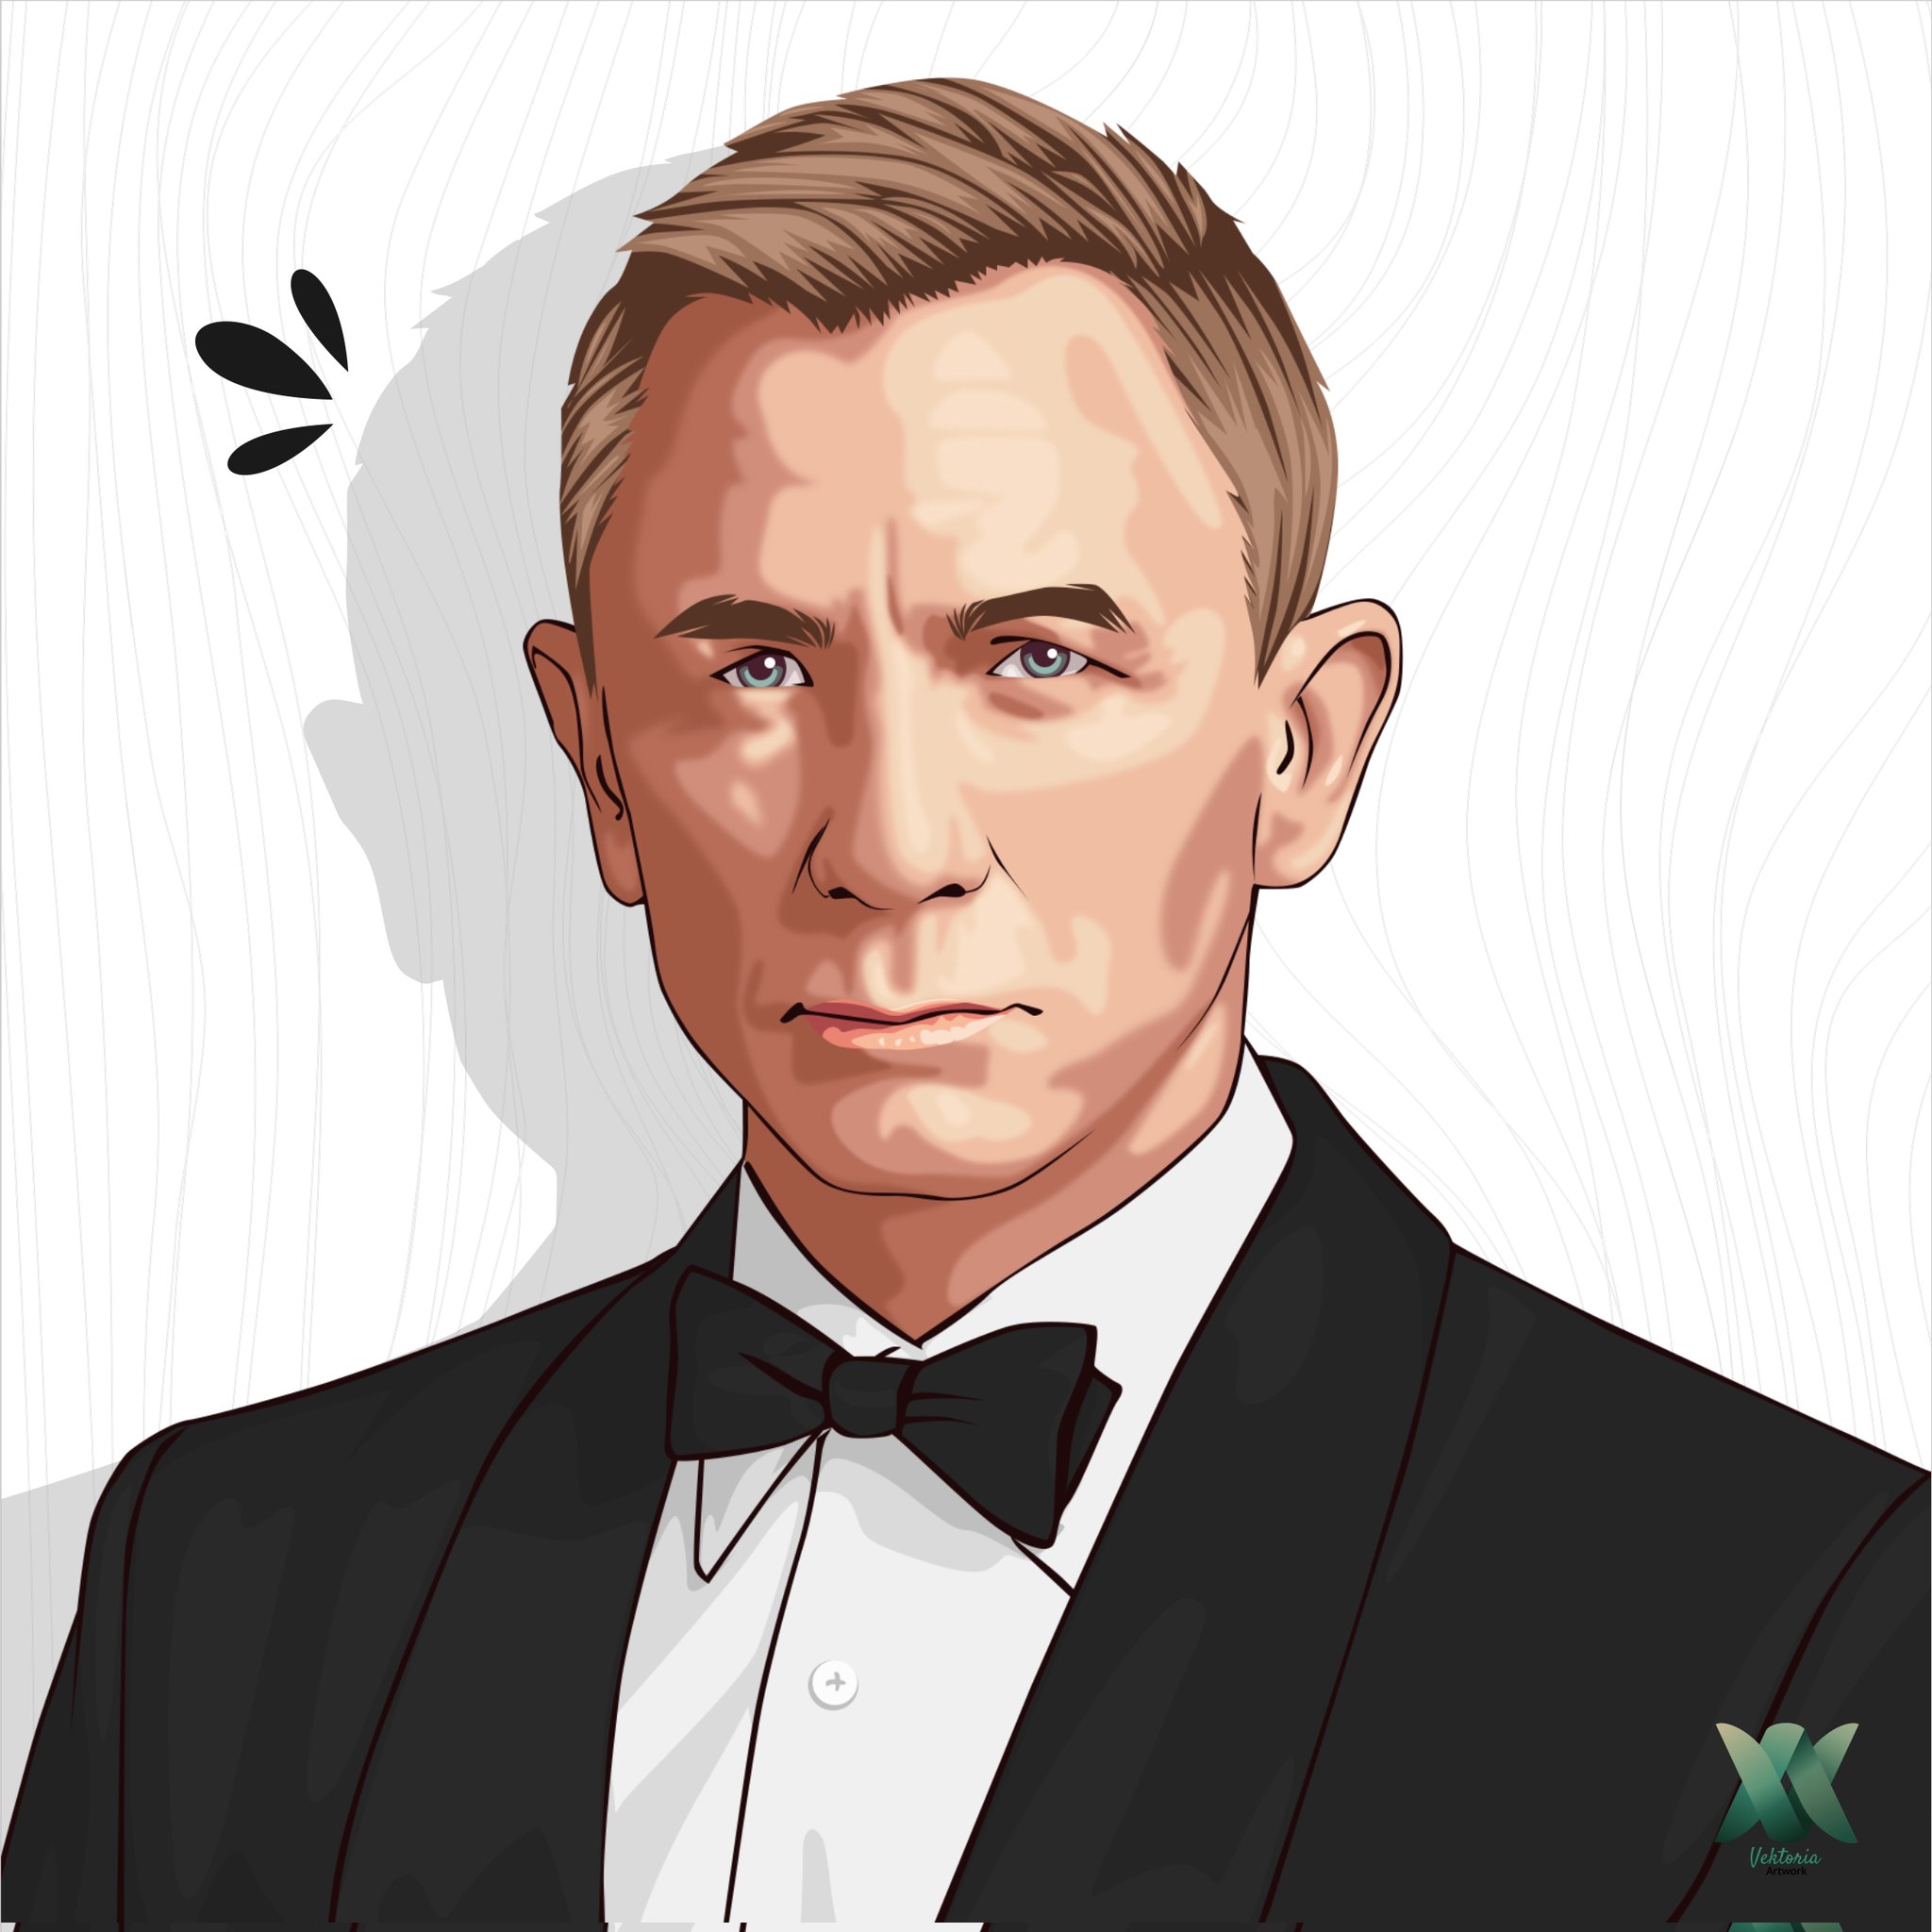 James bond 007 Images  drawing kid drawingkid on ShareChat